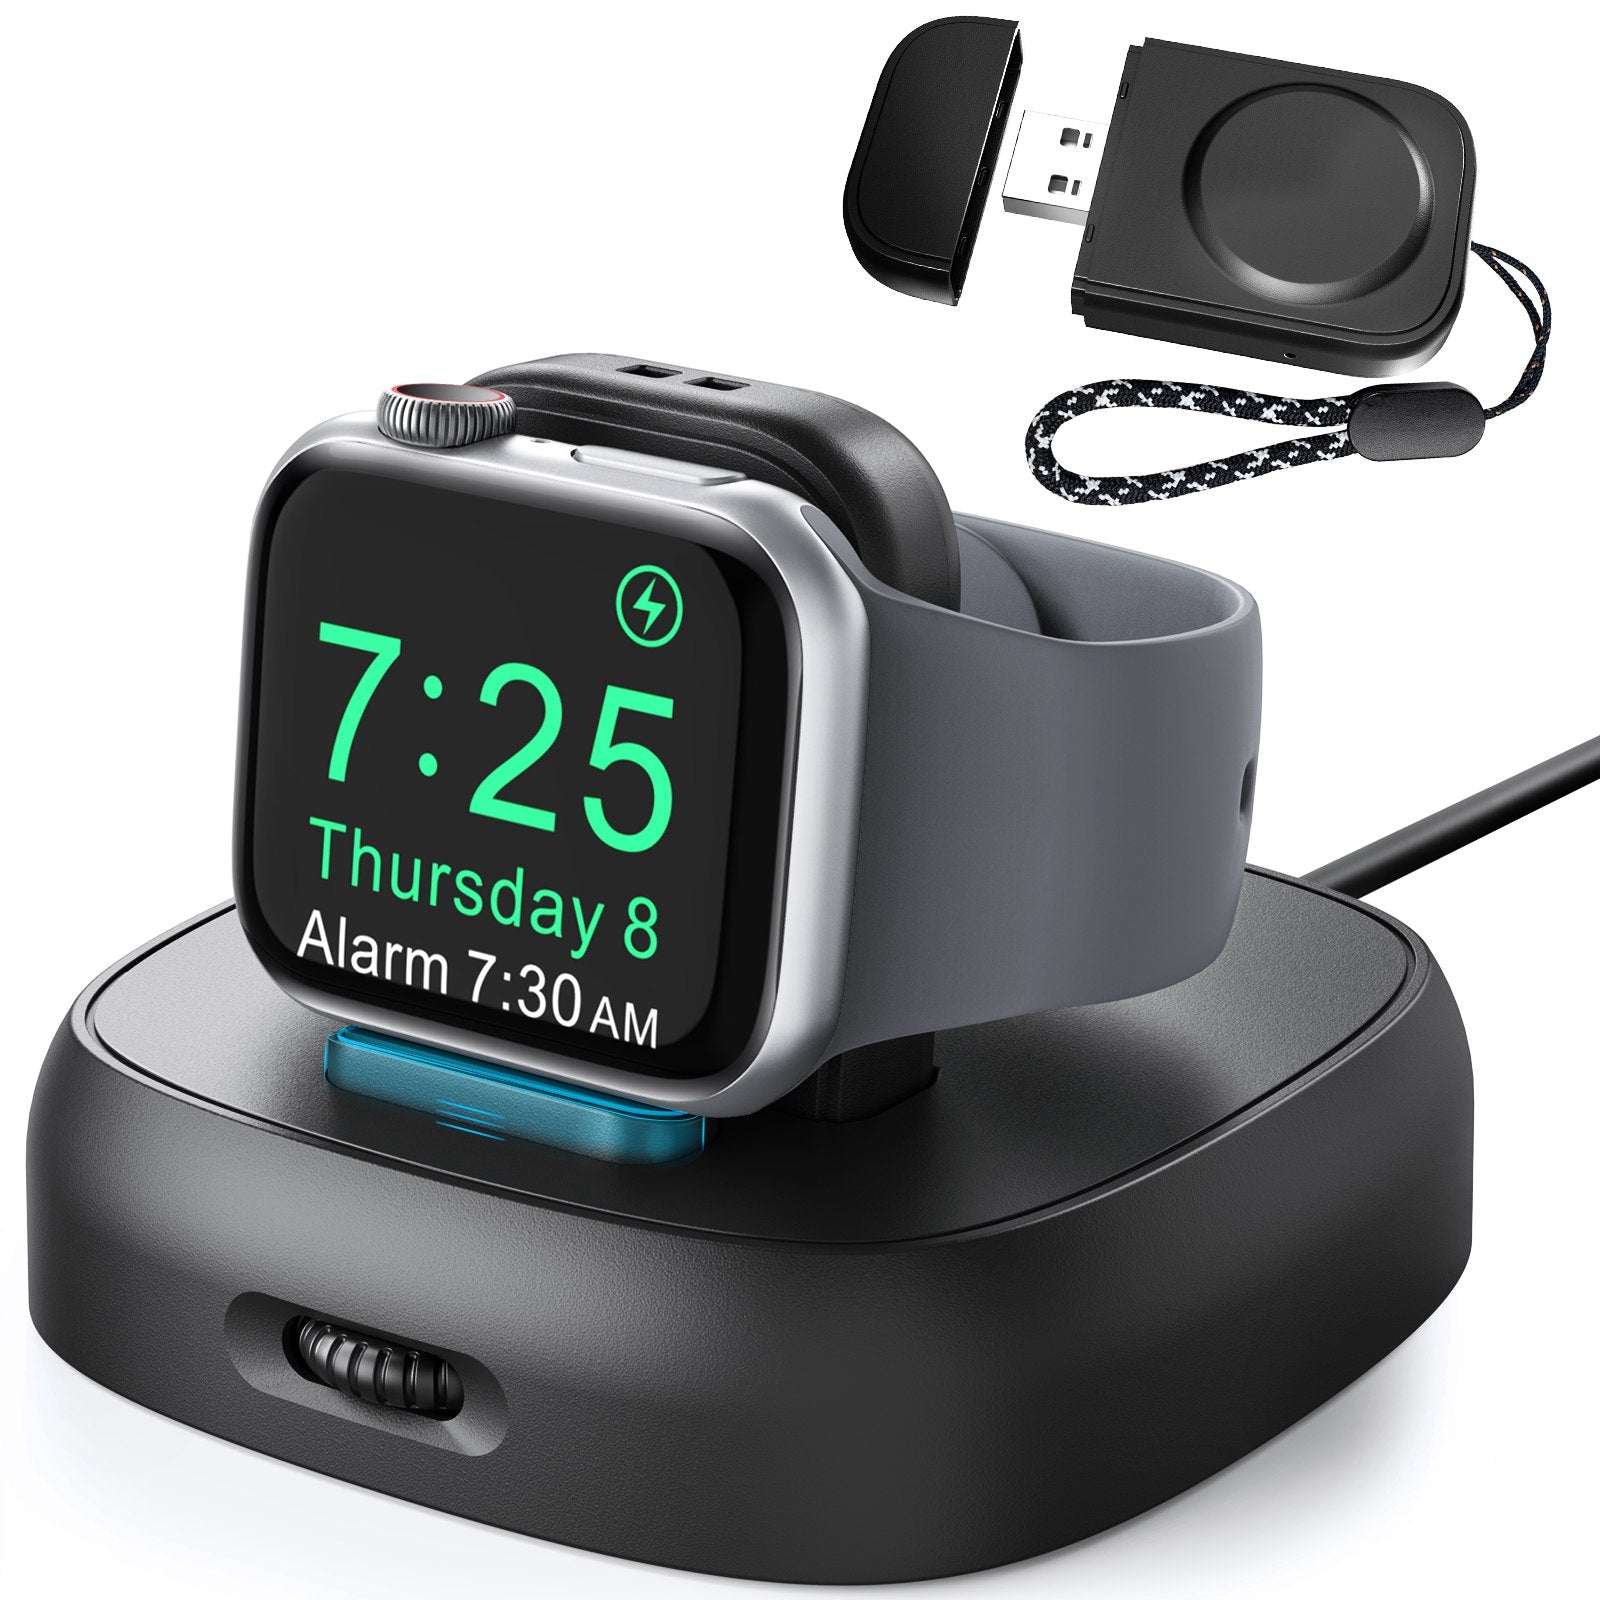 PT143 For Apple Watch 2 in 1 Magnetic Wireless Charger + Base, Height Adjustable - Black